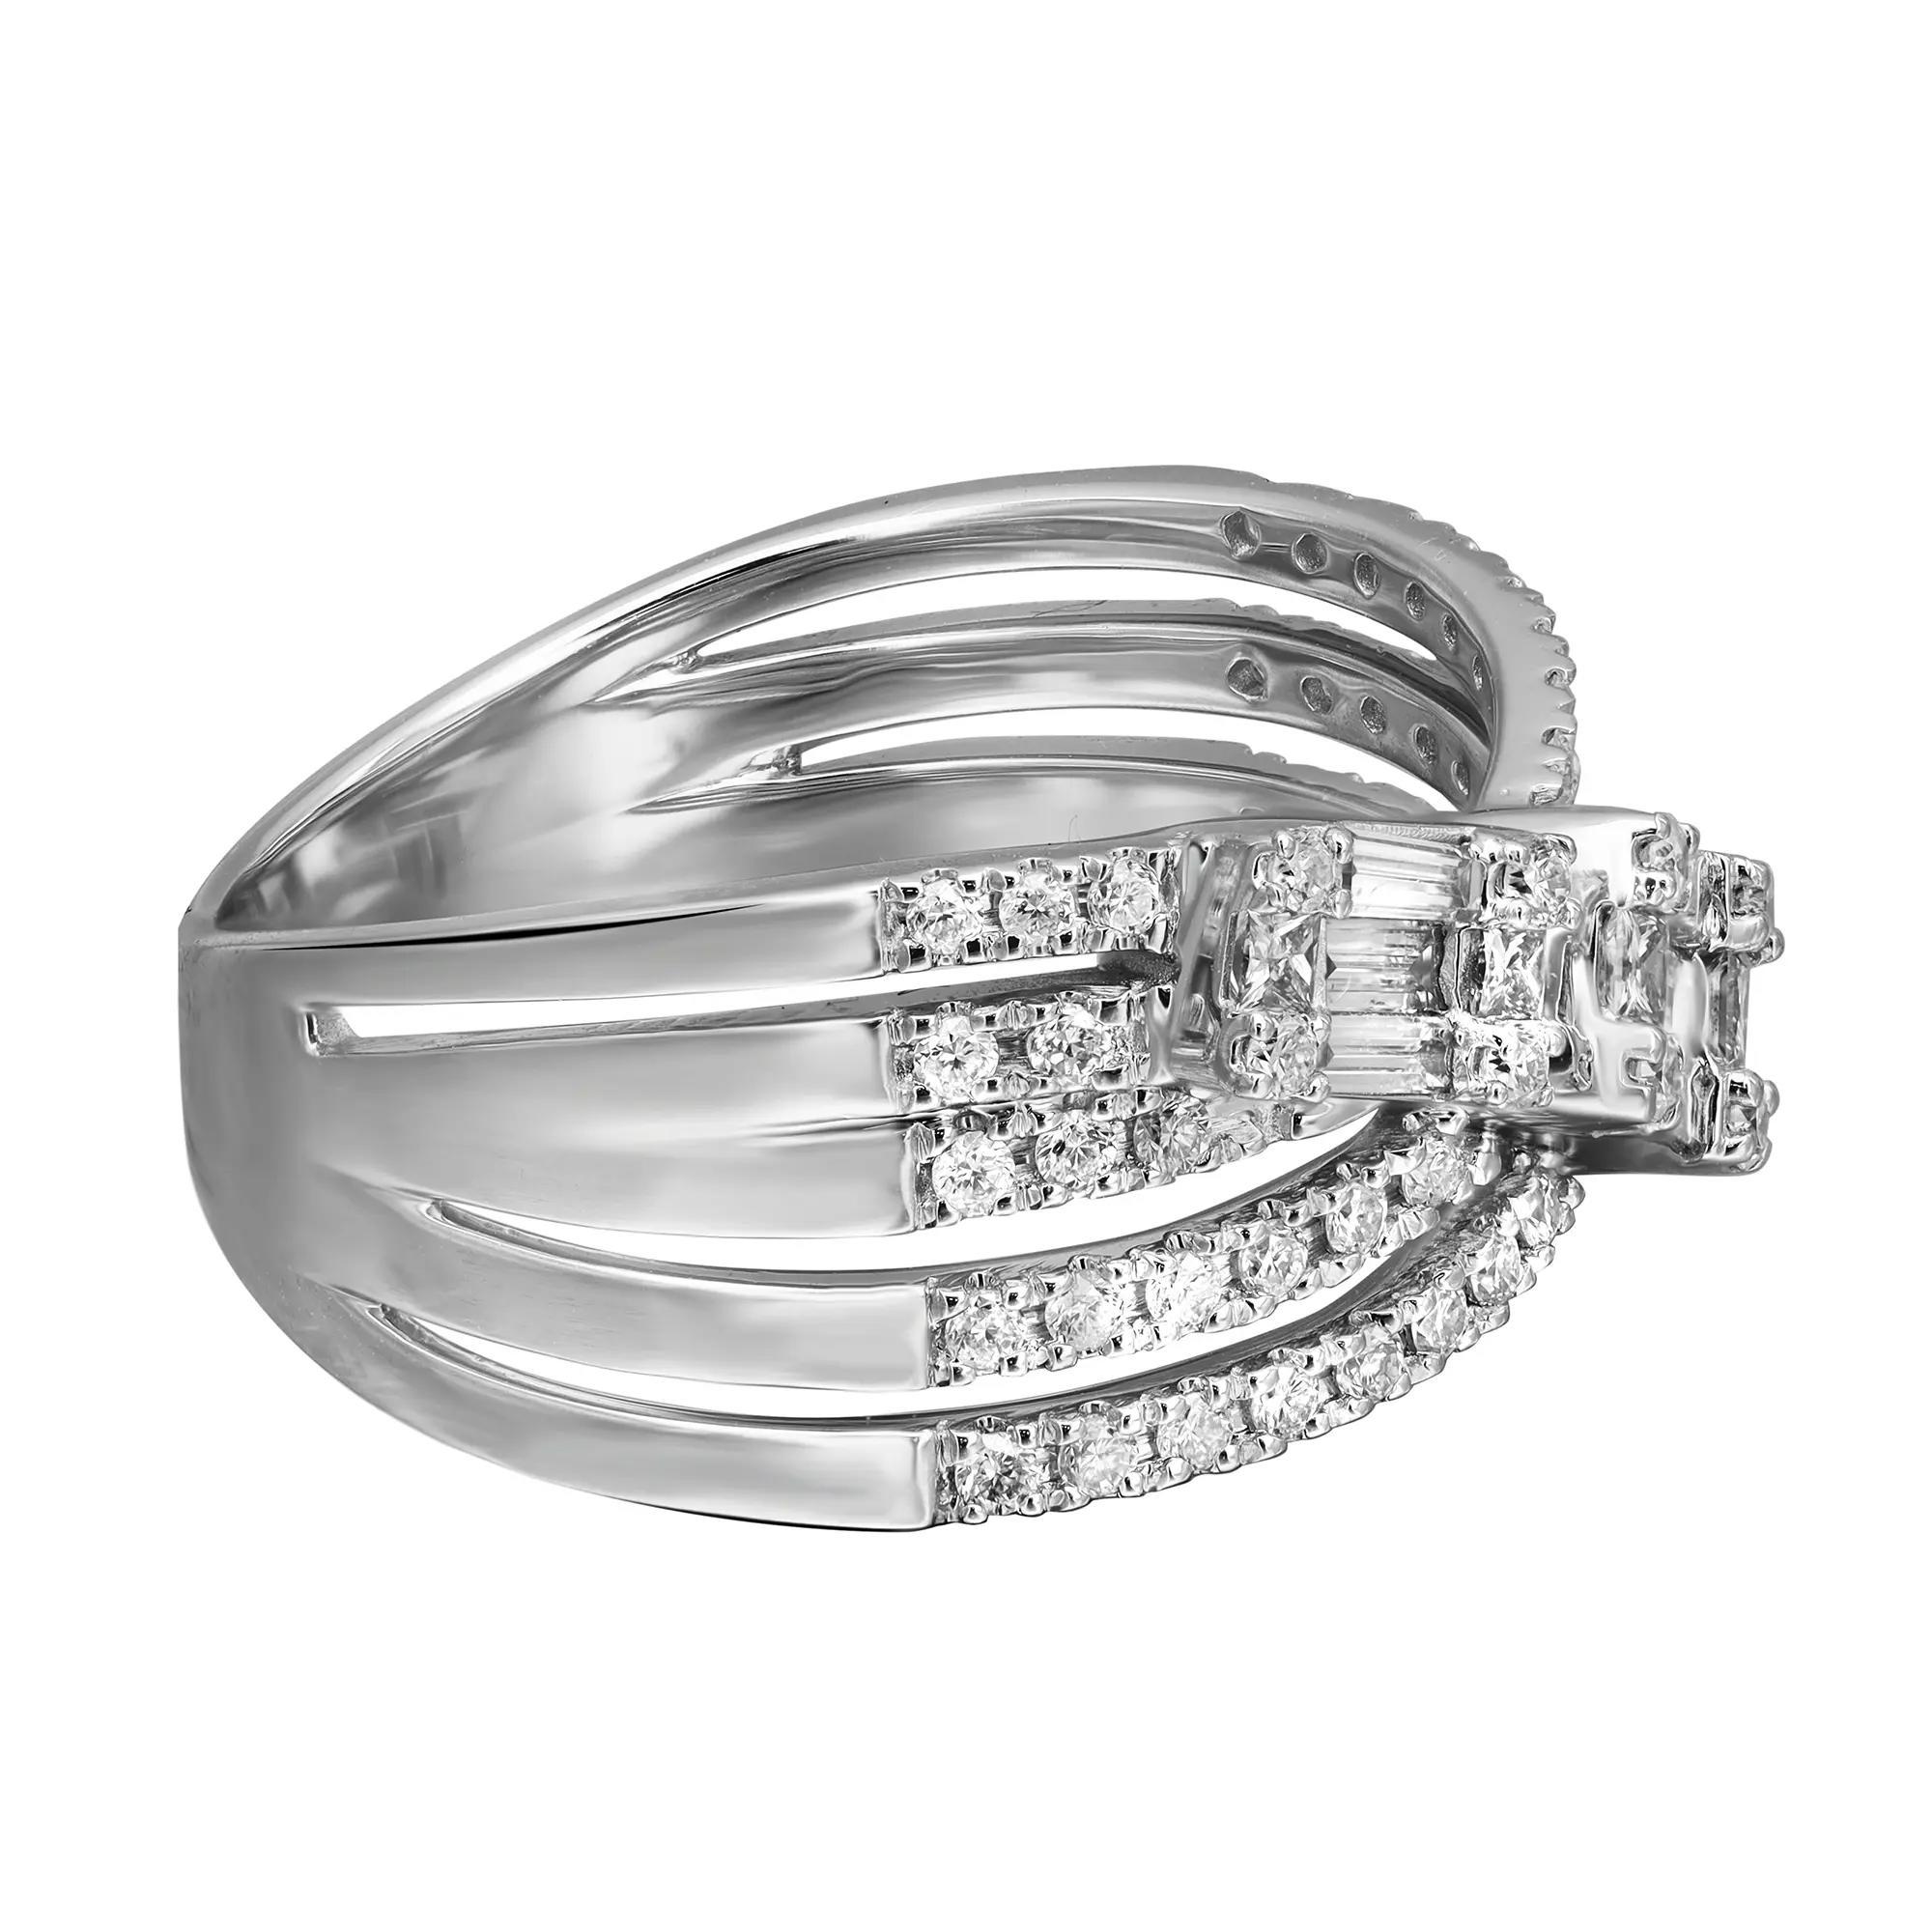 This beautiful ring features multi bands of prong set round cut diamonds intersecting with a channel set baguette and round cut diamond band in a crossover design. Crafted in 14K white gold, this ring exudes understated style and elegance. Set with